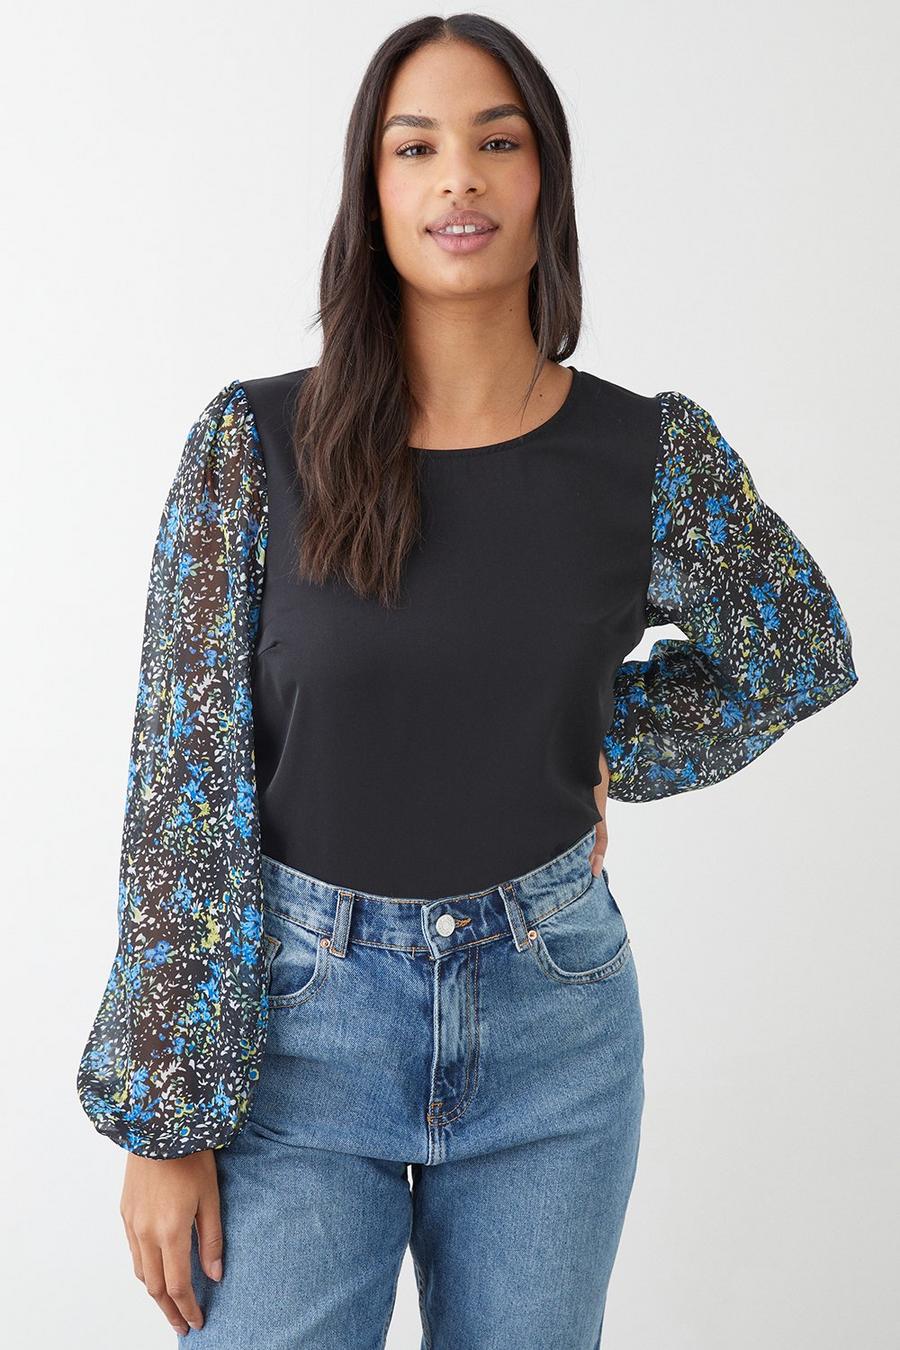 Blue Floral Chiffon Contrast Sleeve Blouse